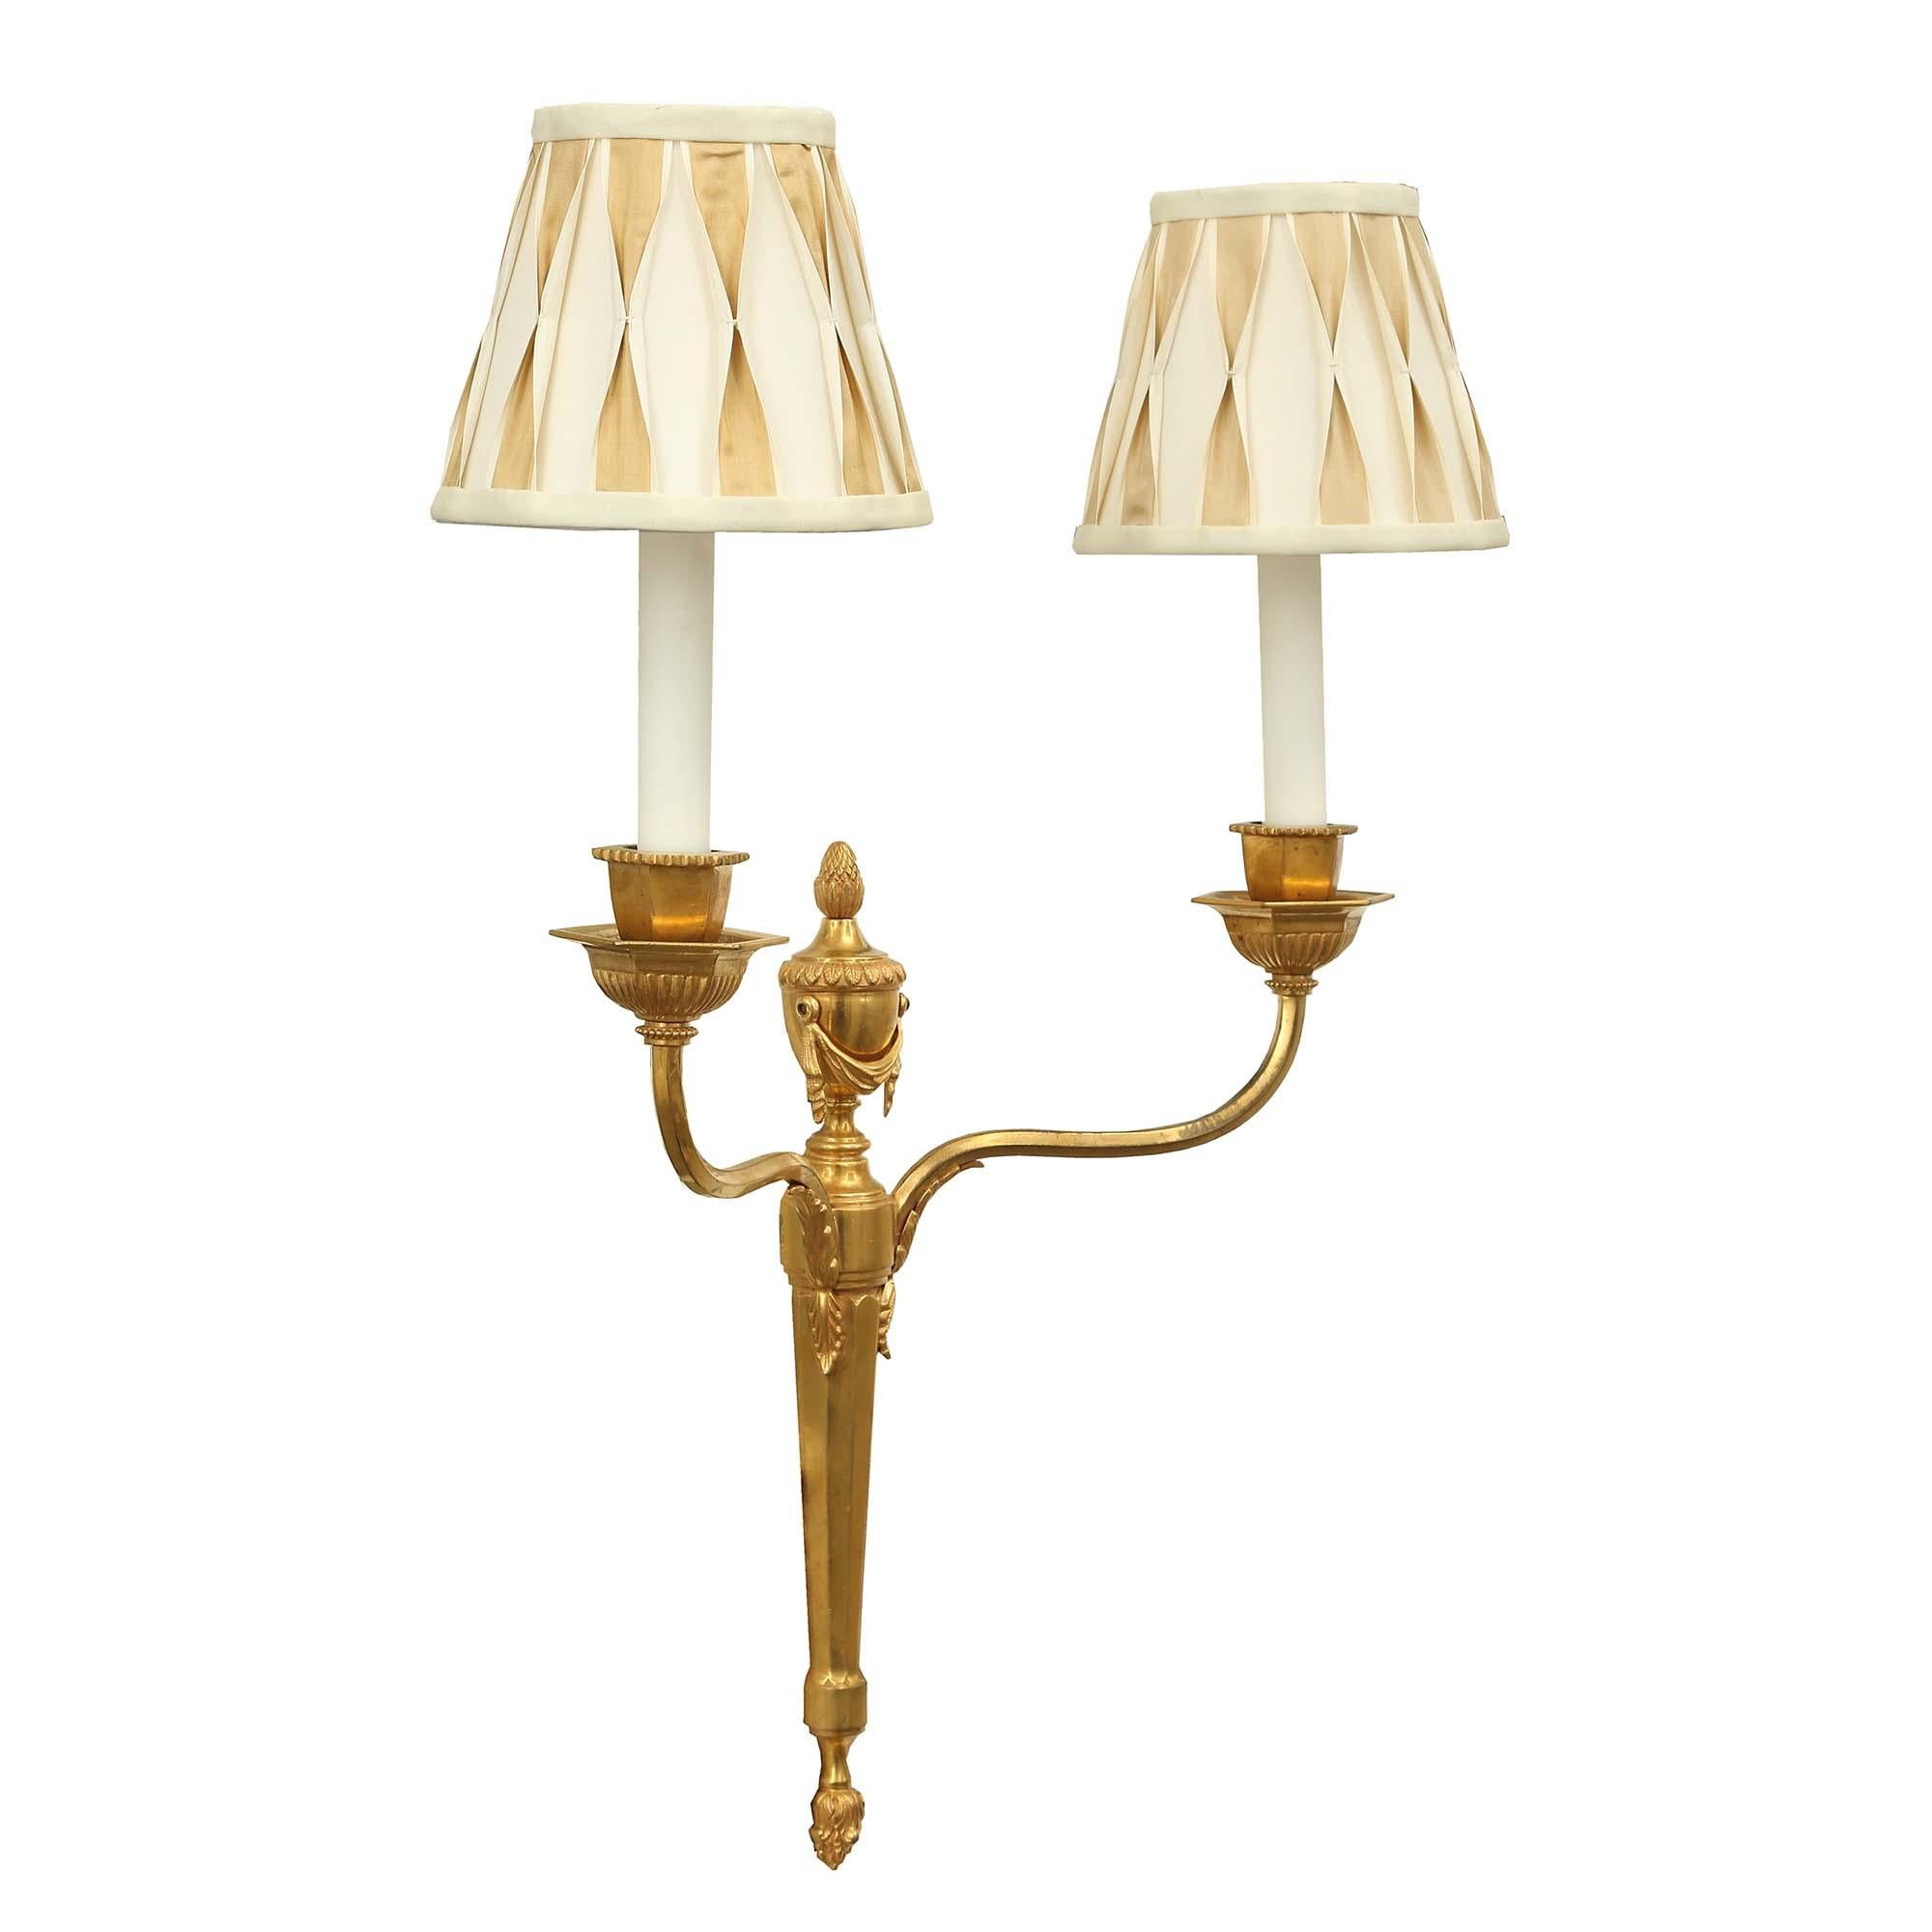  Pair of 19th Century Louis XVI Style Two-Arm Ormolu Sconces In Good Condition For Sale In West Palm Beach, FL